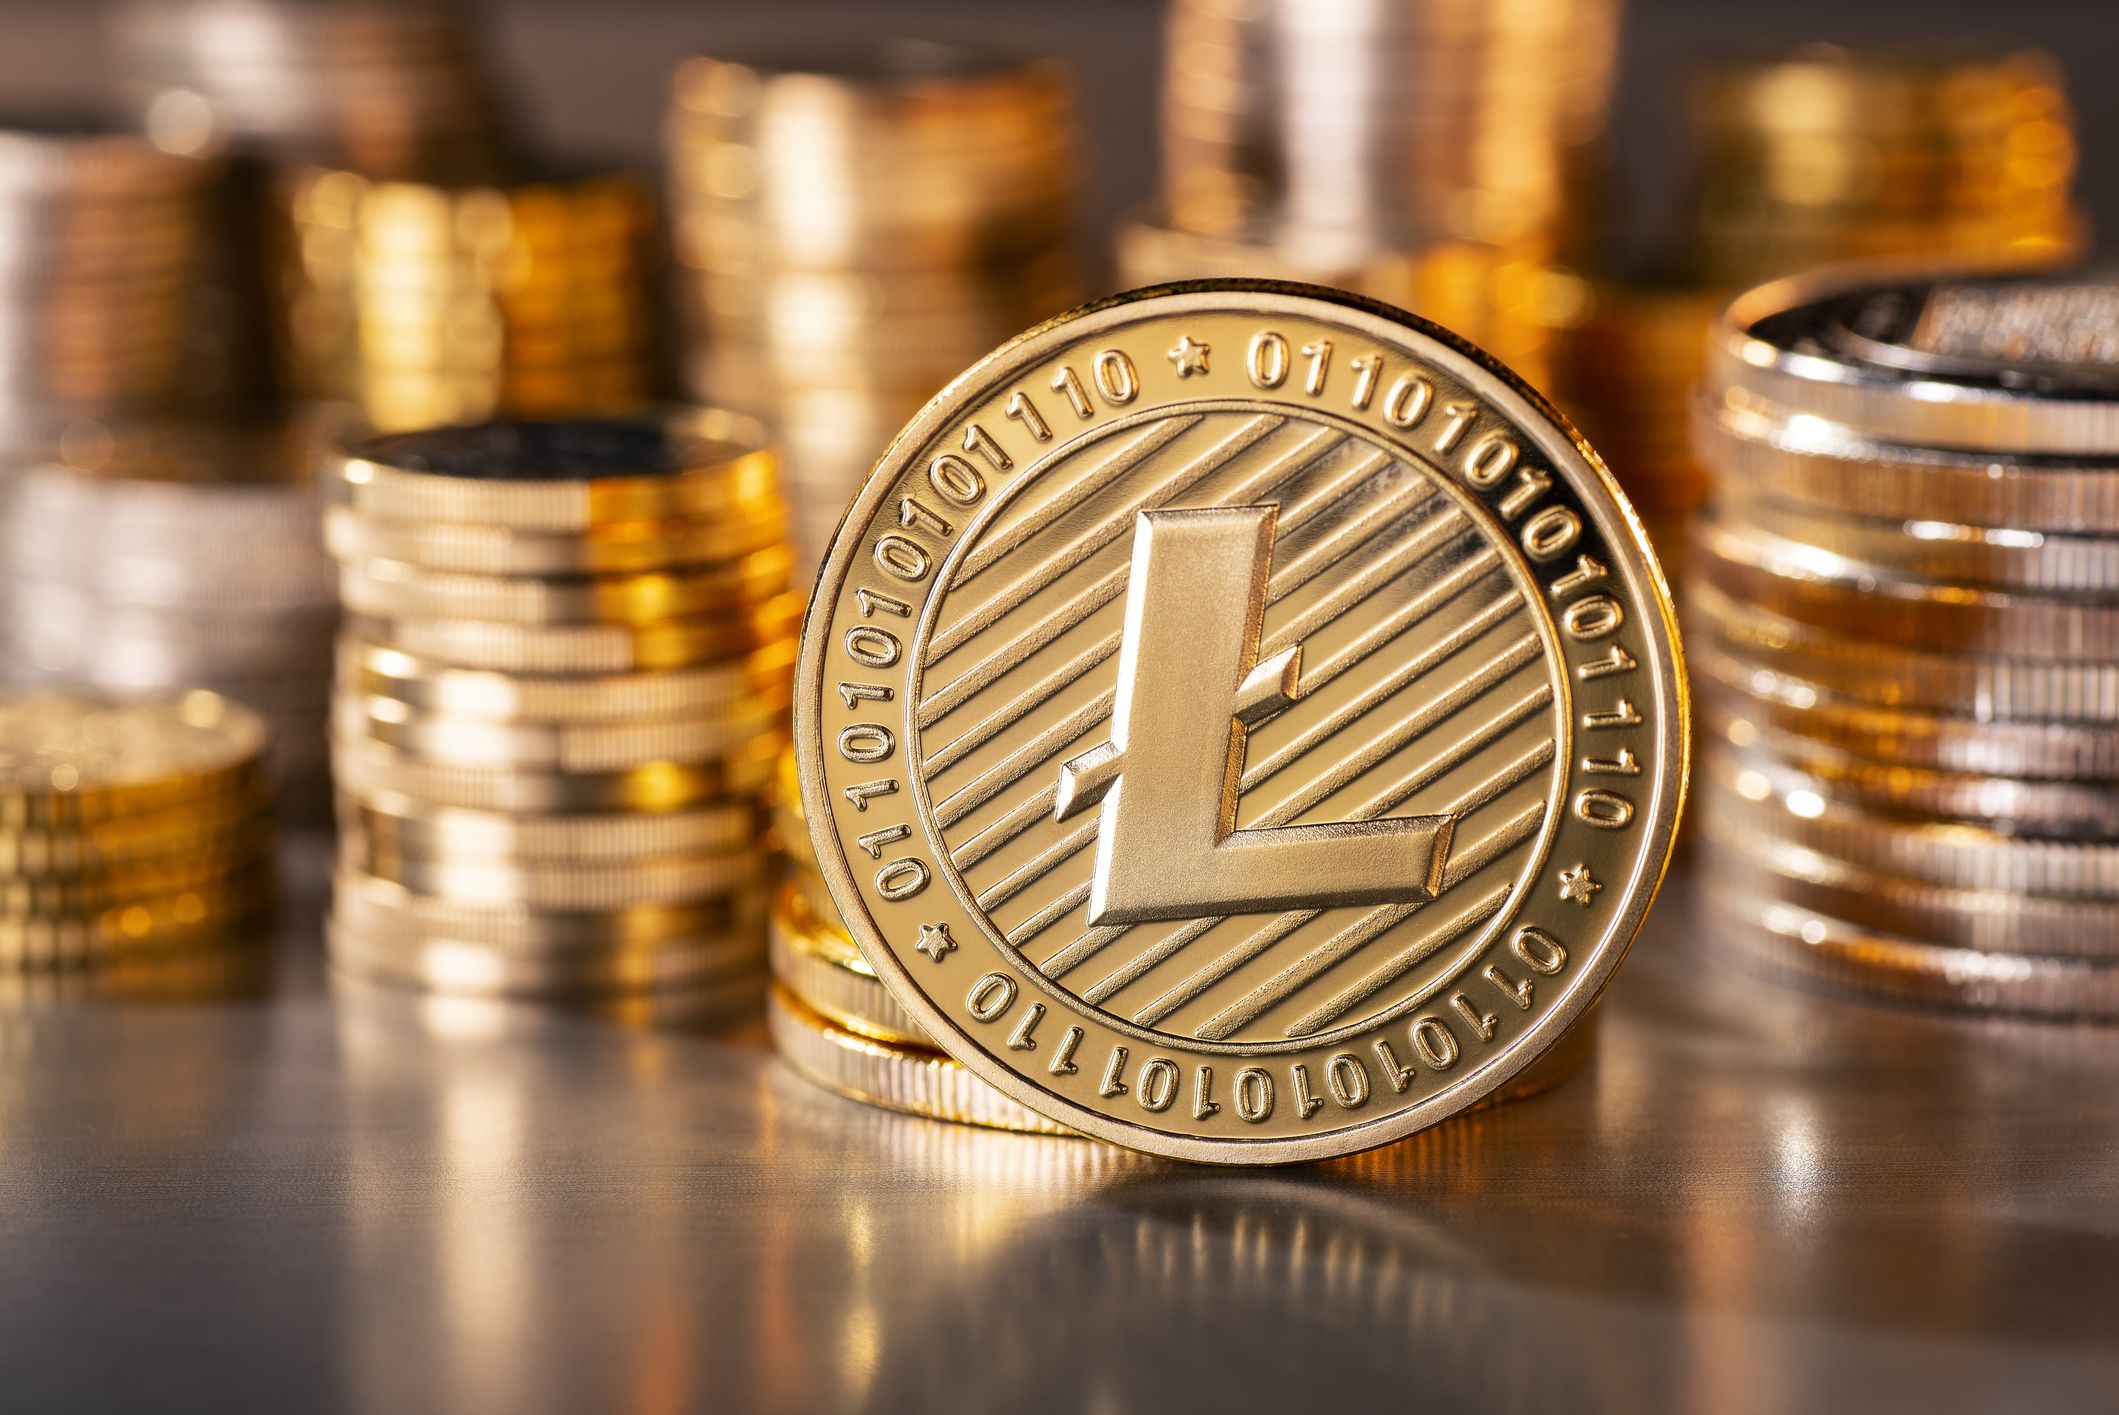 What is ltc bitcoin 0.01700000 btc to usd